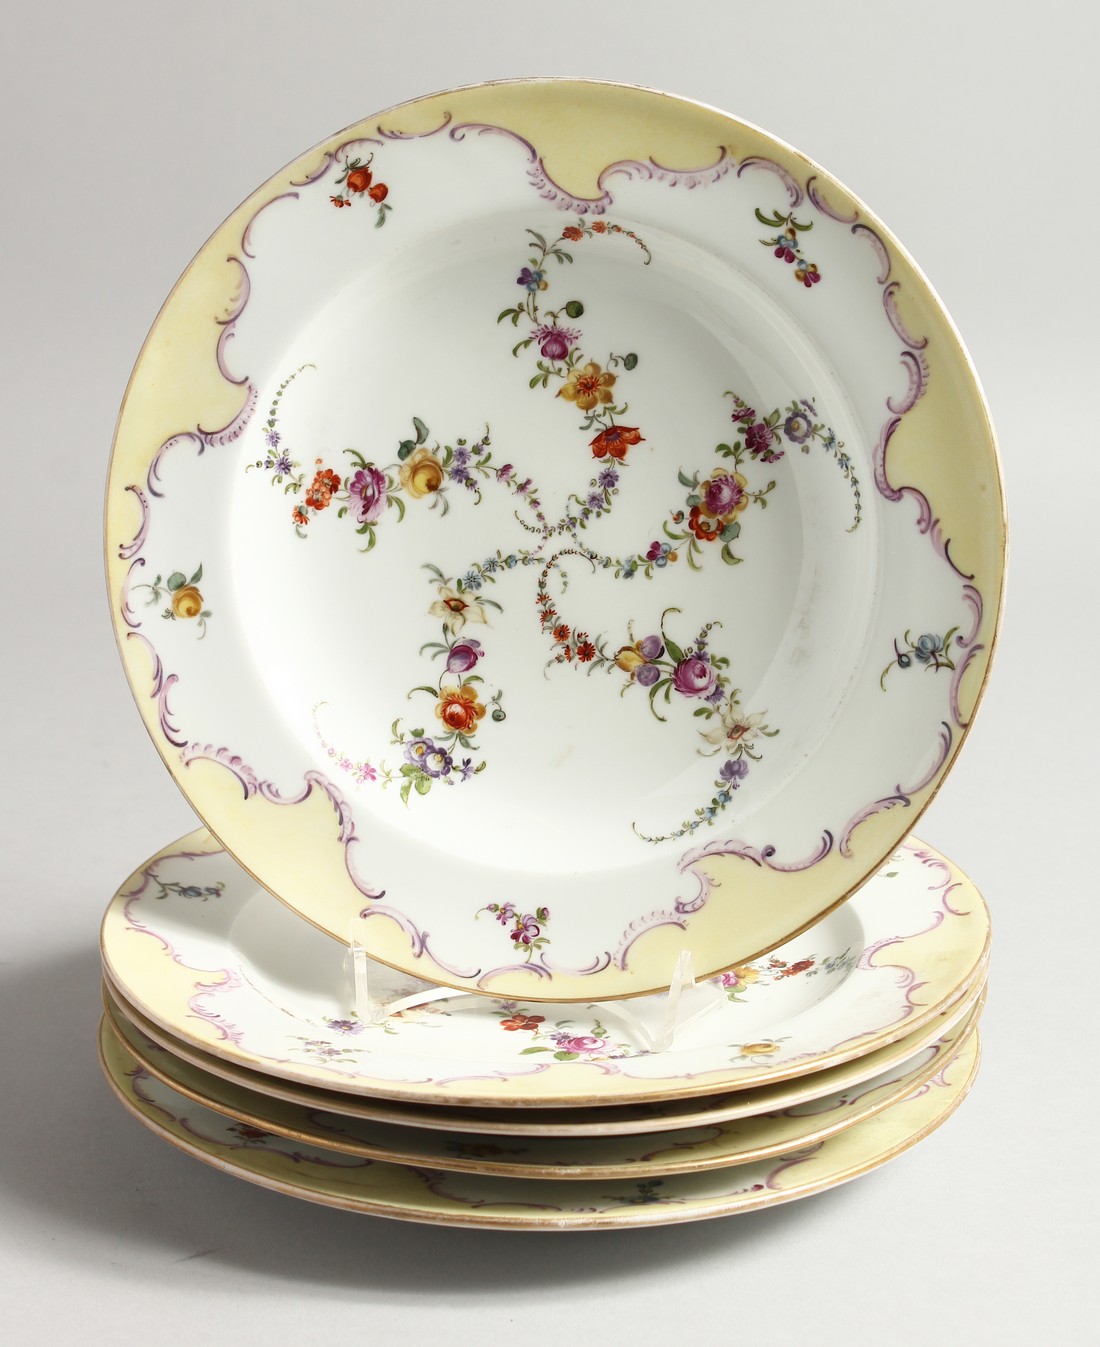 A SET OF FIVE 19TH CENTURY MEISSEN PLATES painted with garlands Cross swords mark in blue 9ins